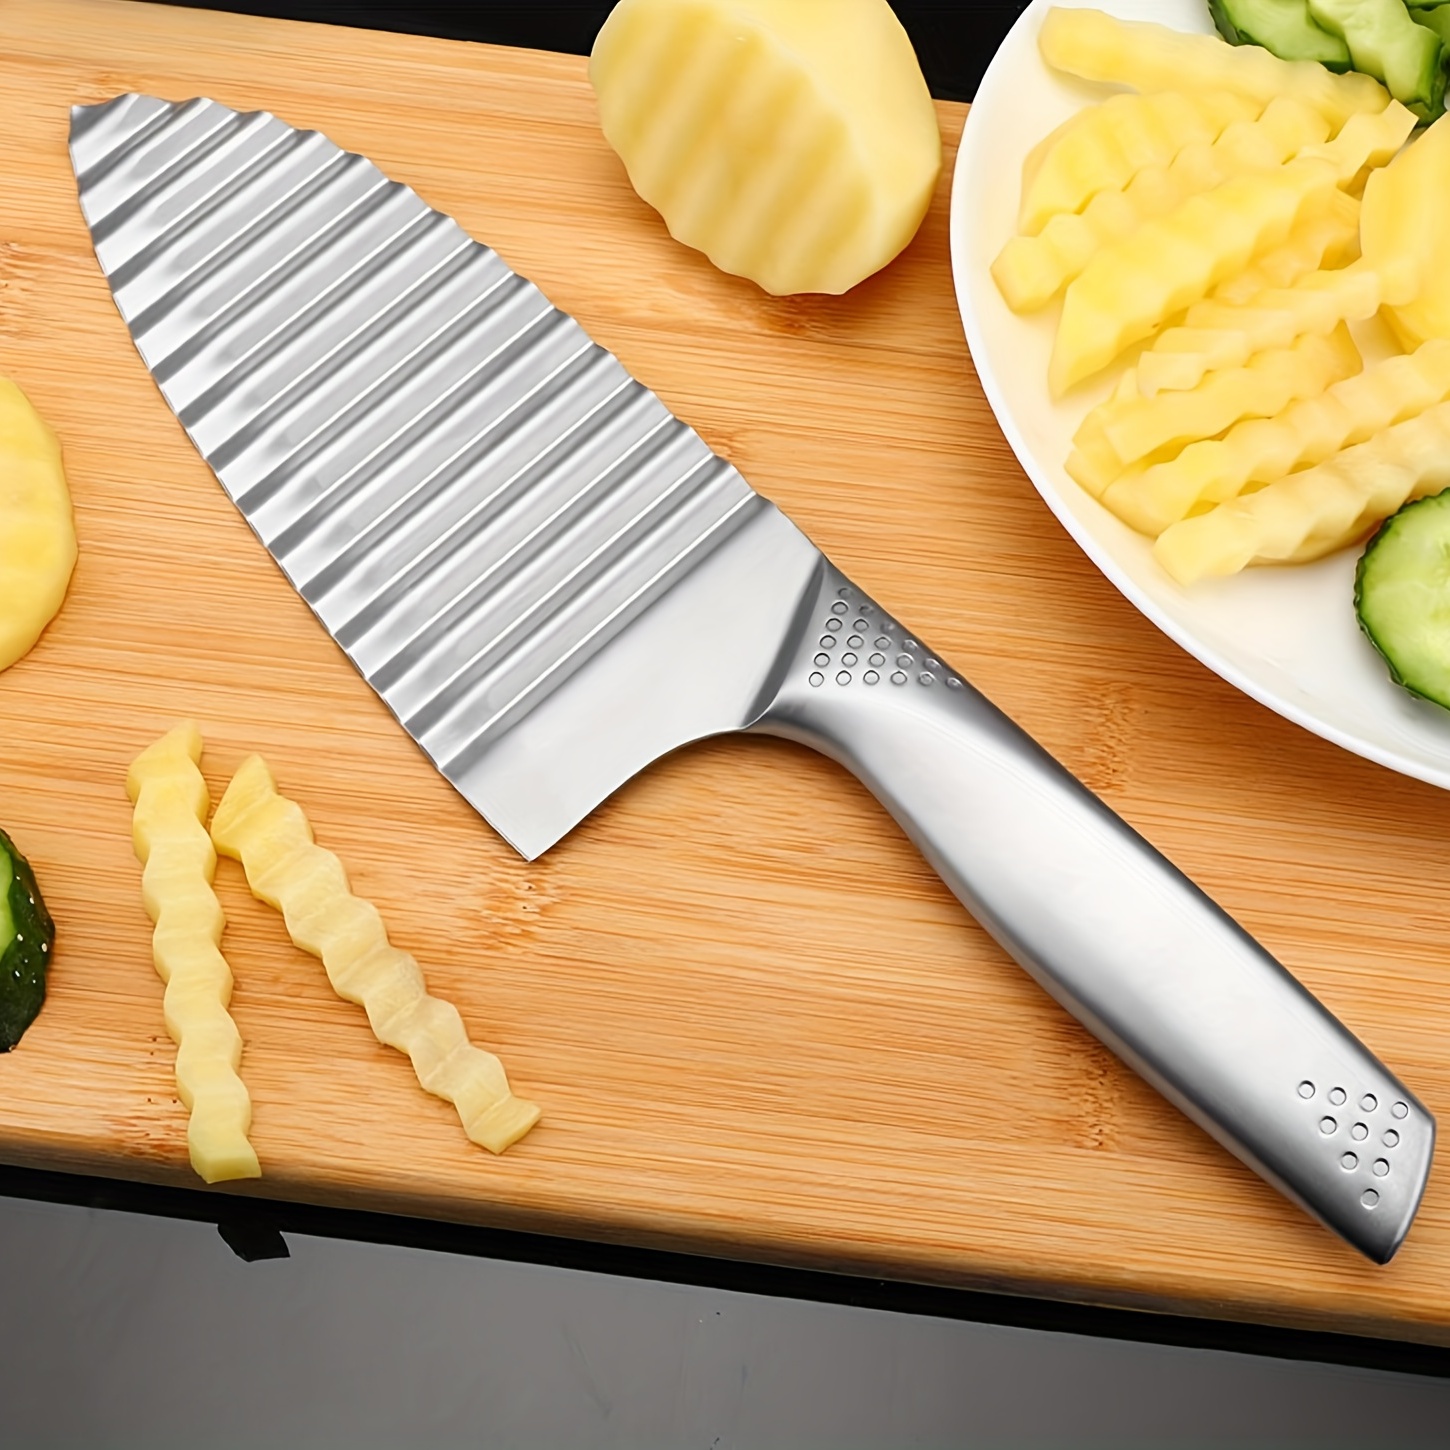 Crinkle Cutter Blade Waffle Fry Cutter Stainless Steel Vegetable